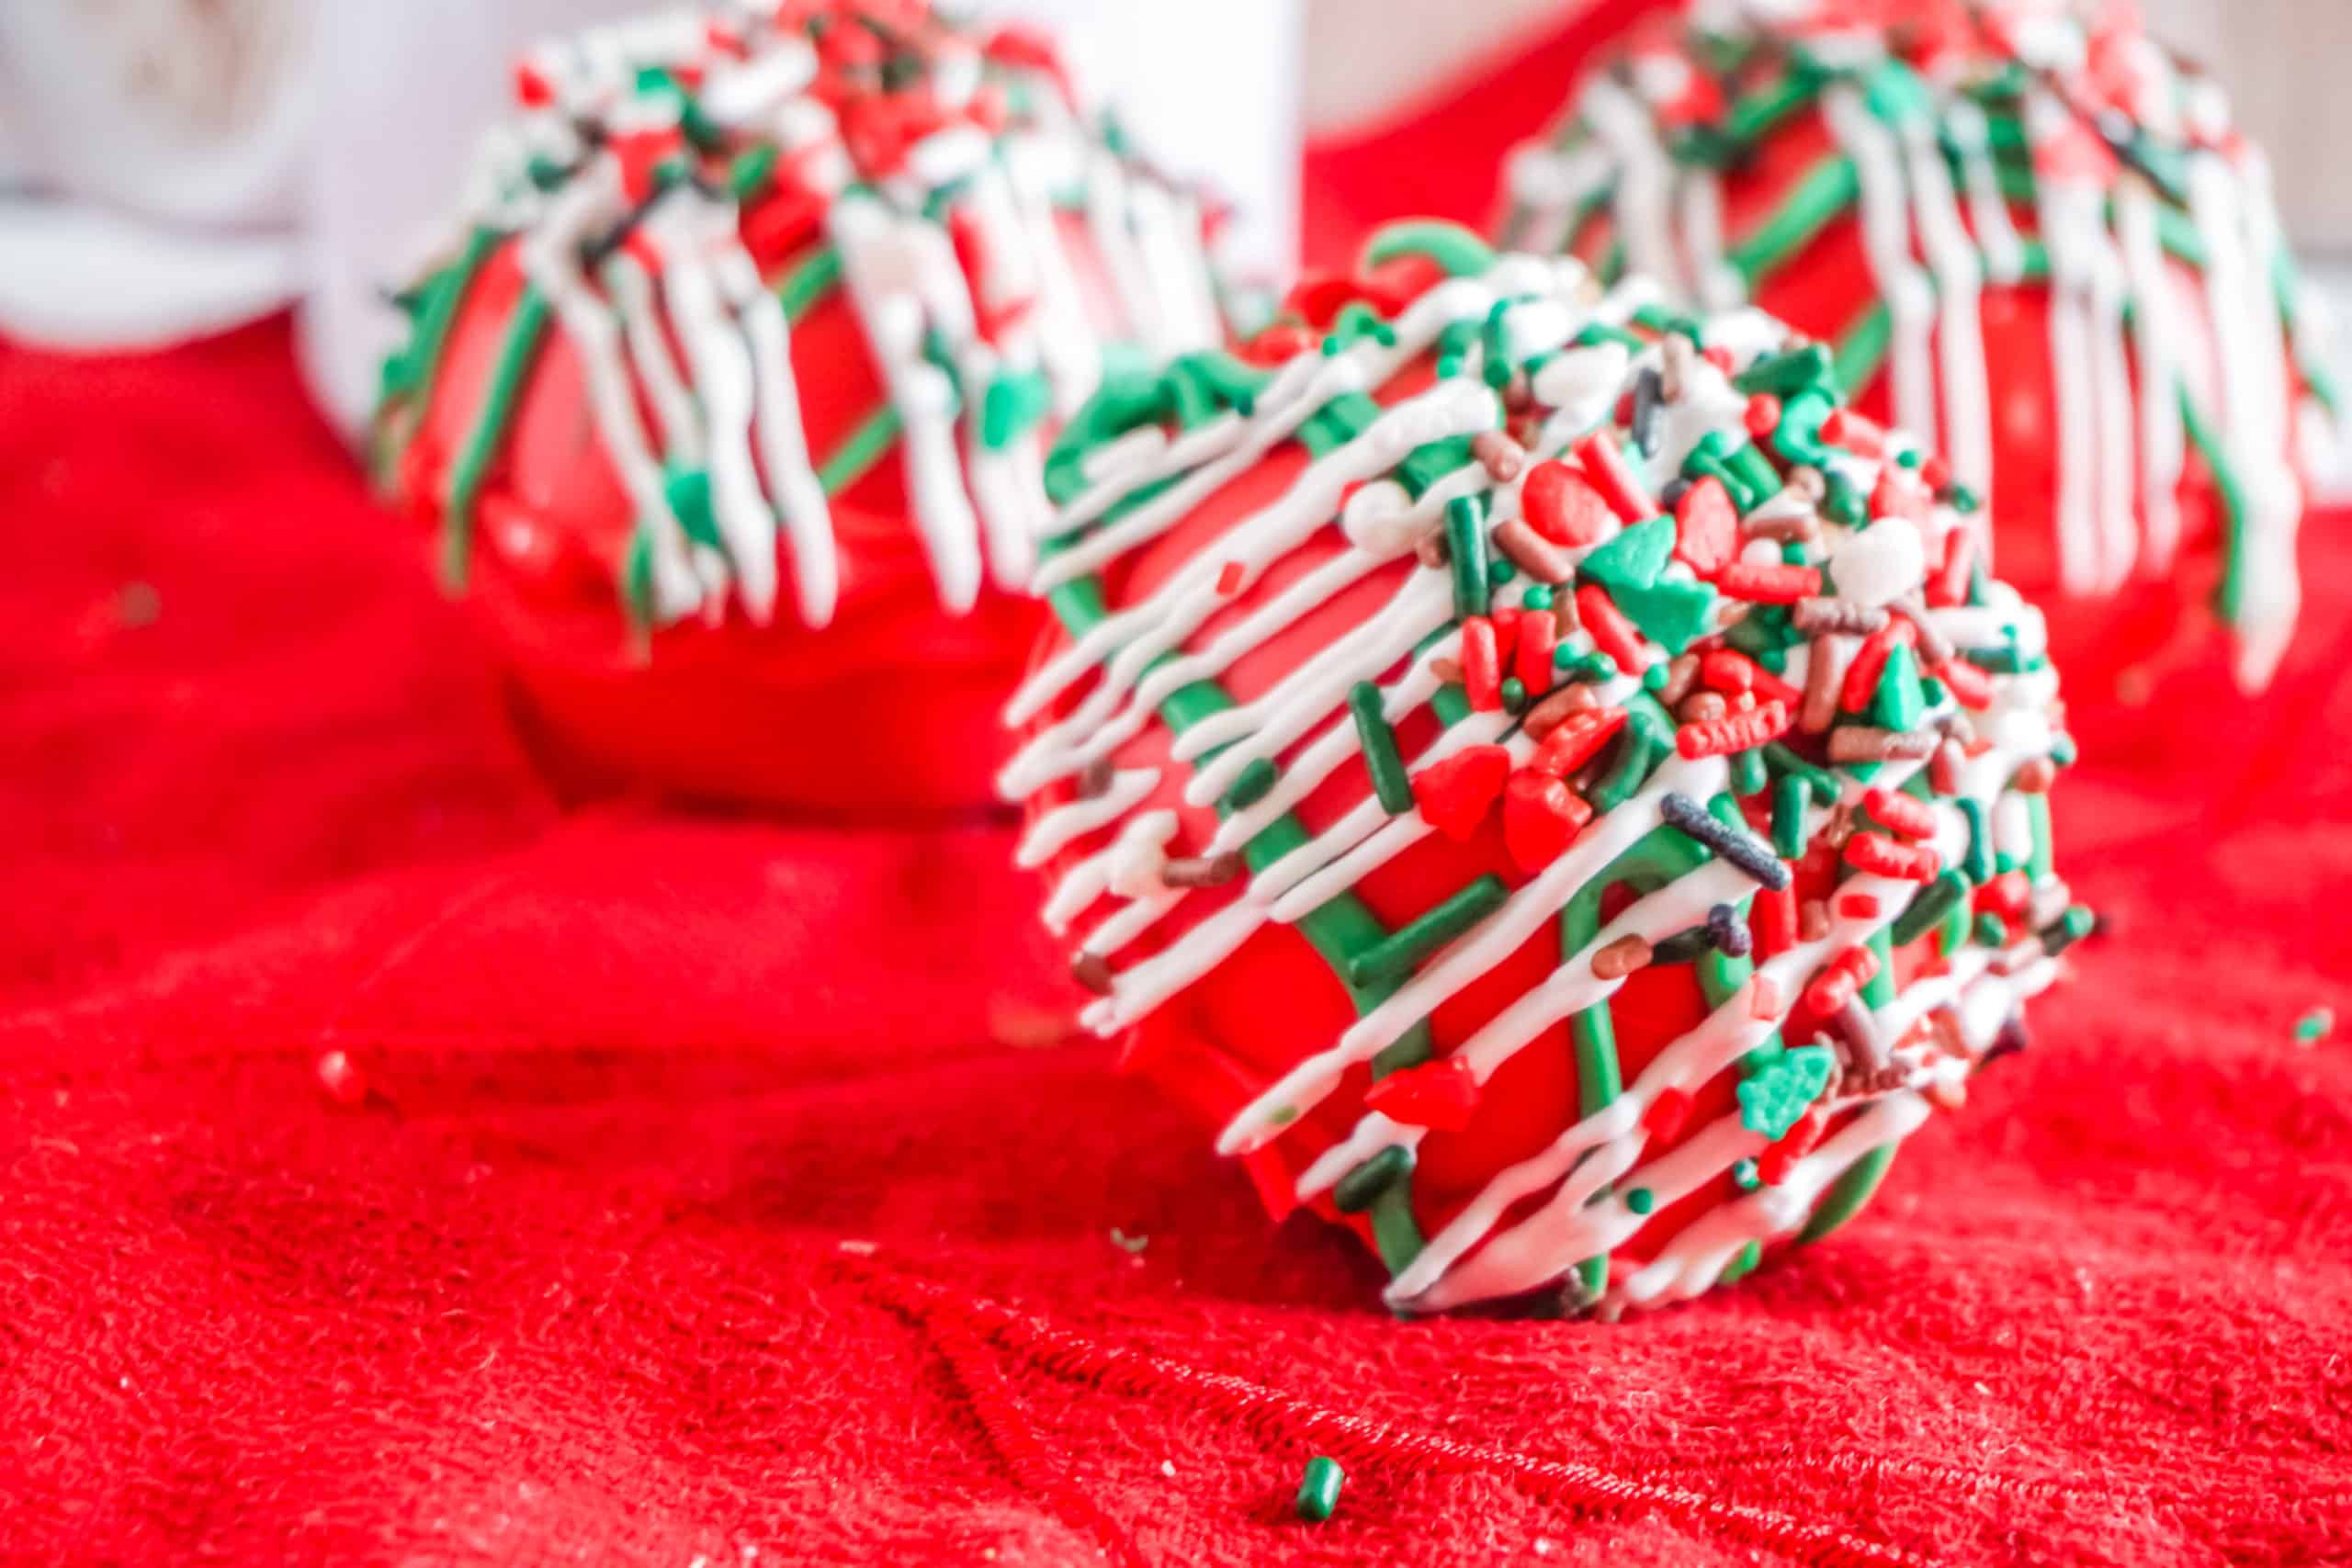 Spectacular Christmas Nougat Hot Cocoa Bombs